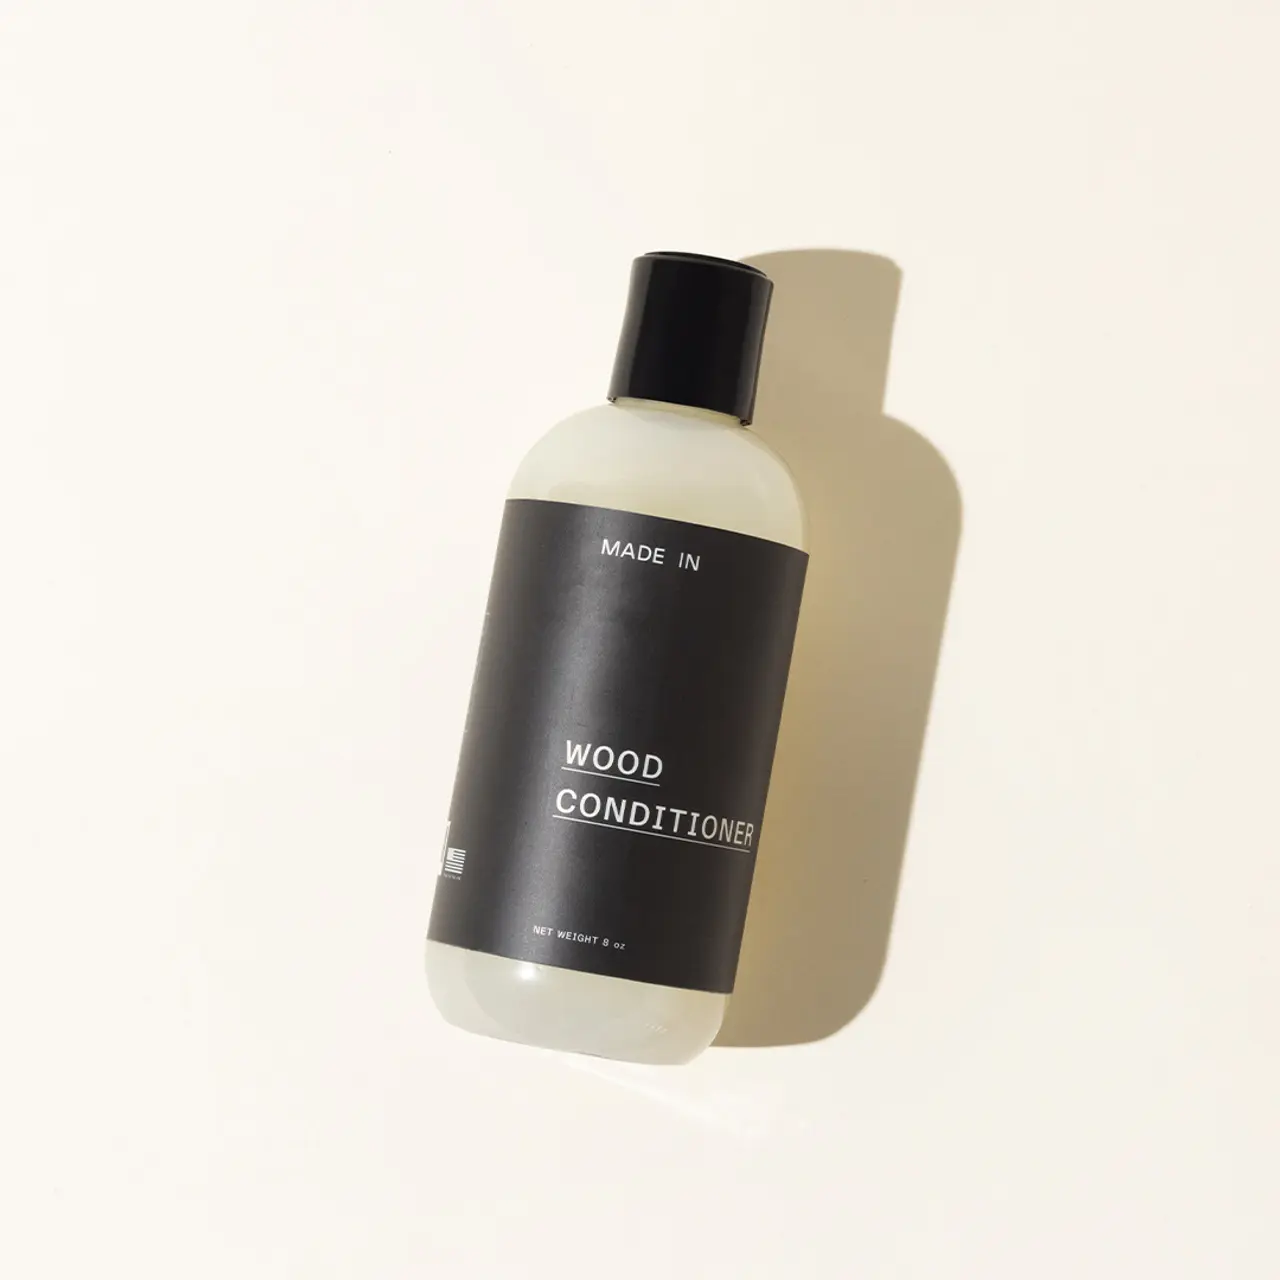 A bottle labeled "WOOD CONDITIONER" is displayed against a simple background, casting a soft shadow.